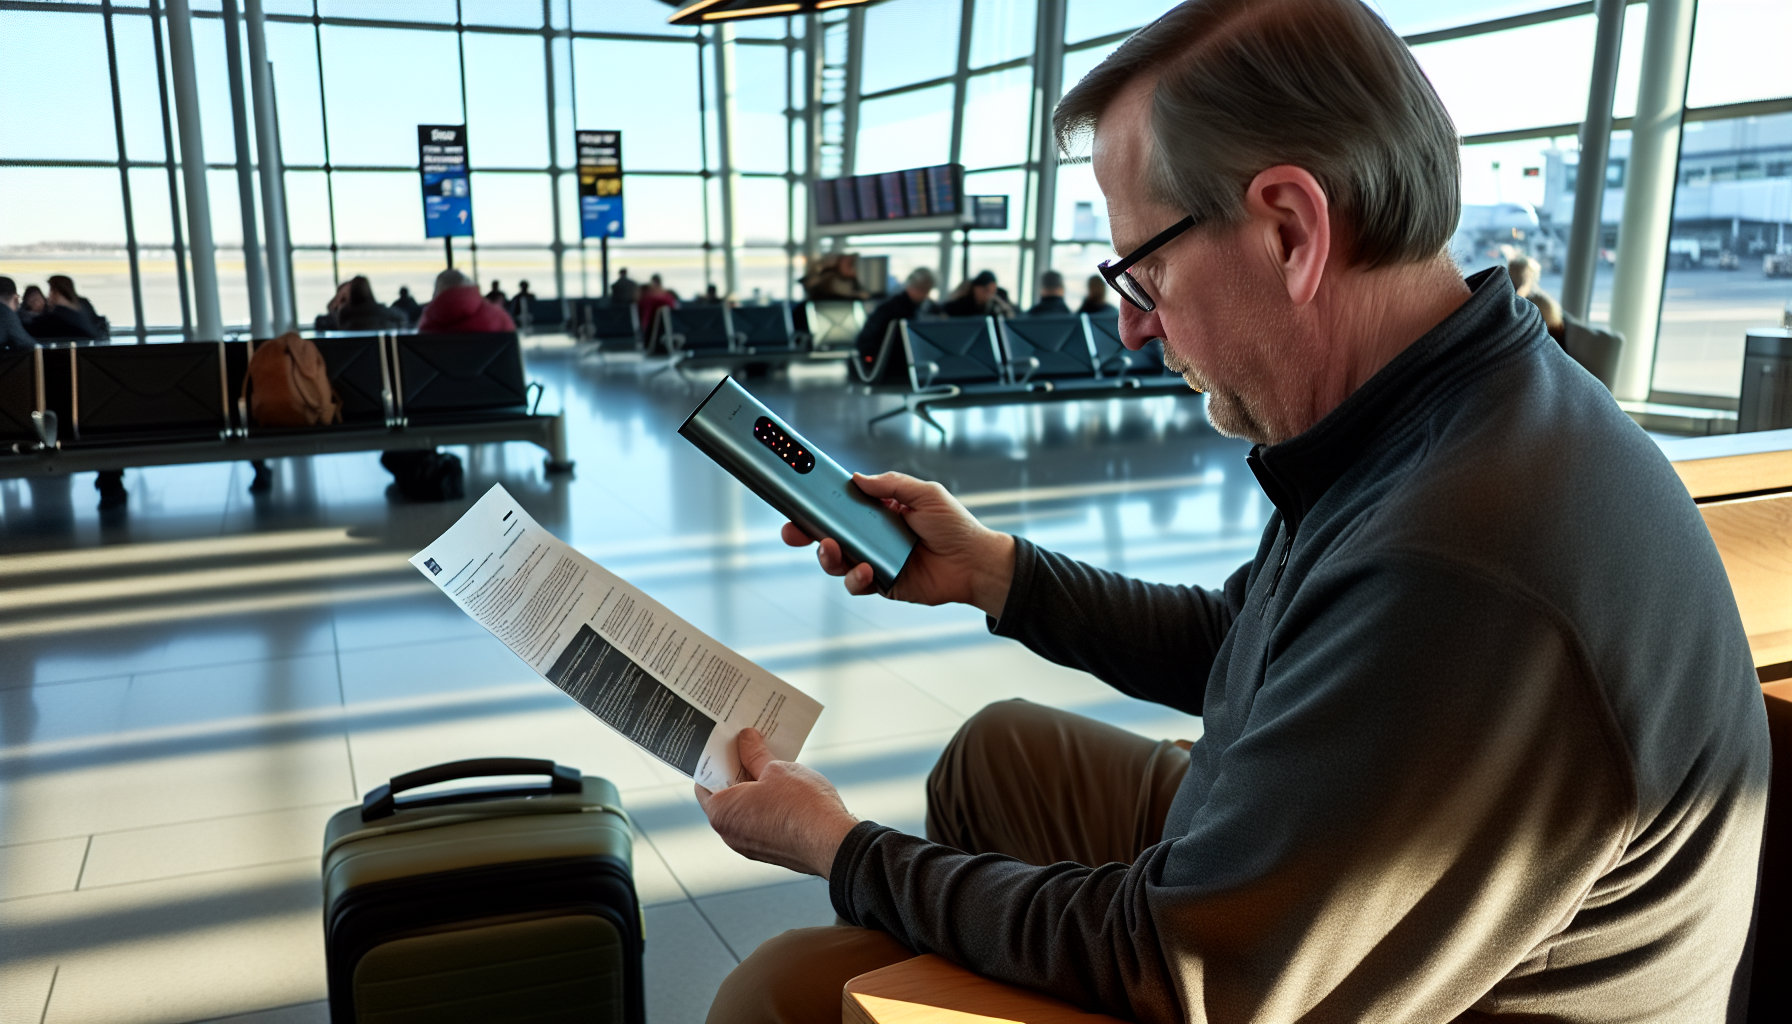 A person holding a portable charger while looking at an airline policy document